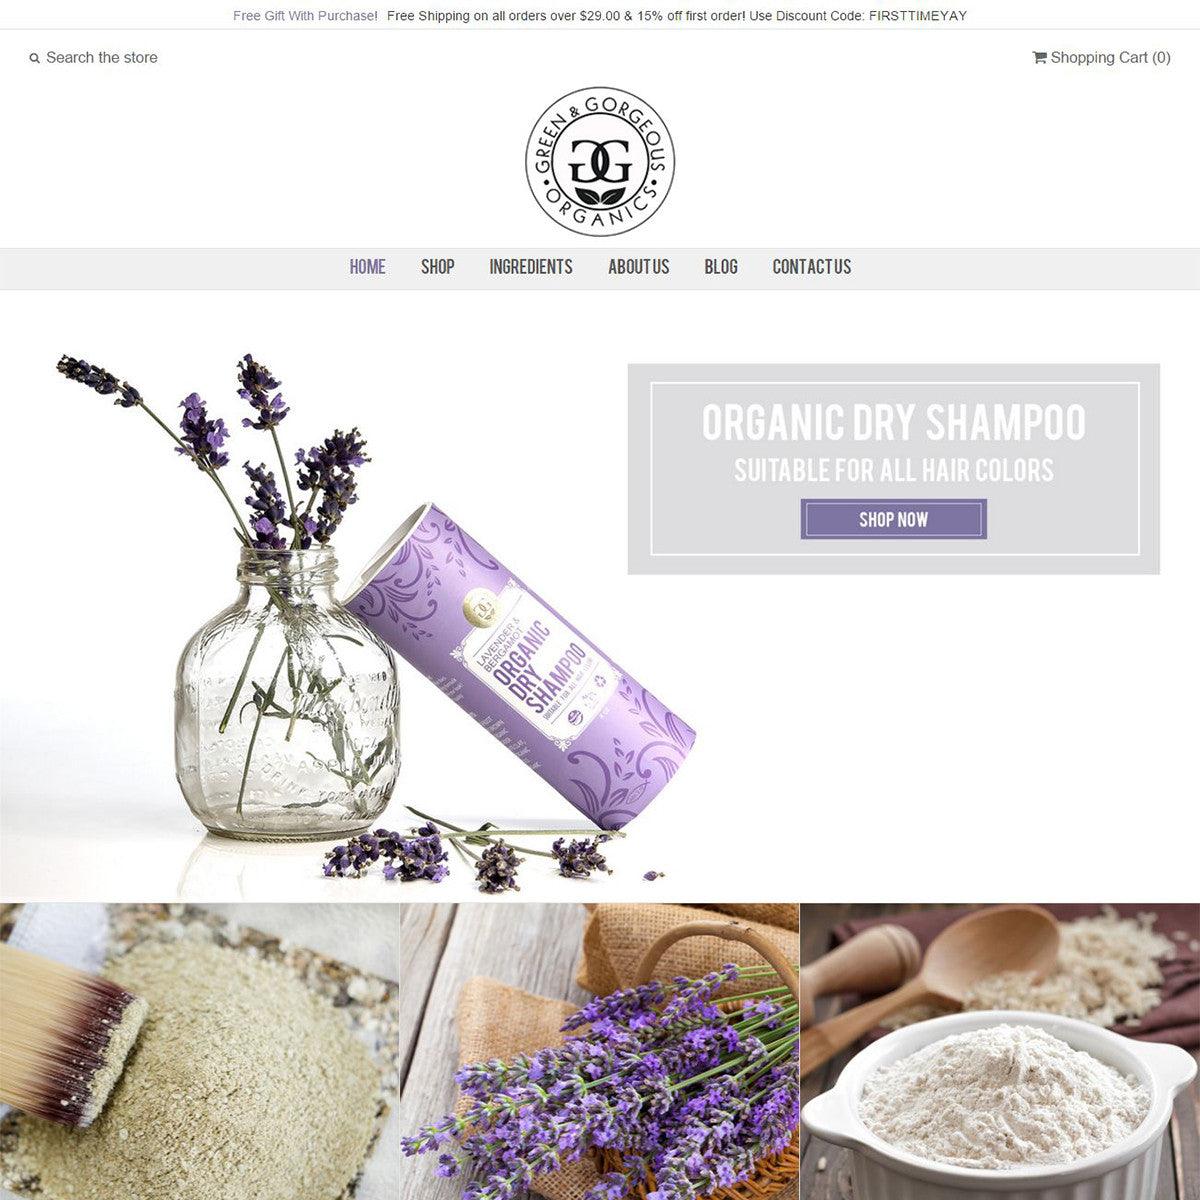 Green & Gorgeous Organics - Photography and Web Design - Los Angeles, US based Shopify Experts Revo Designs